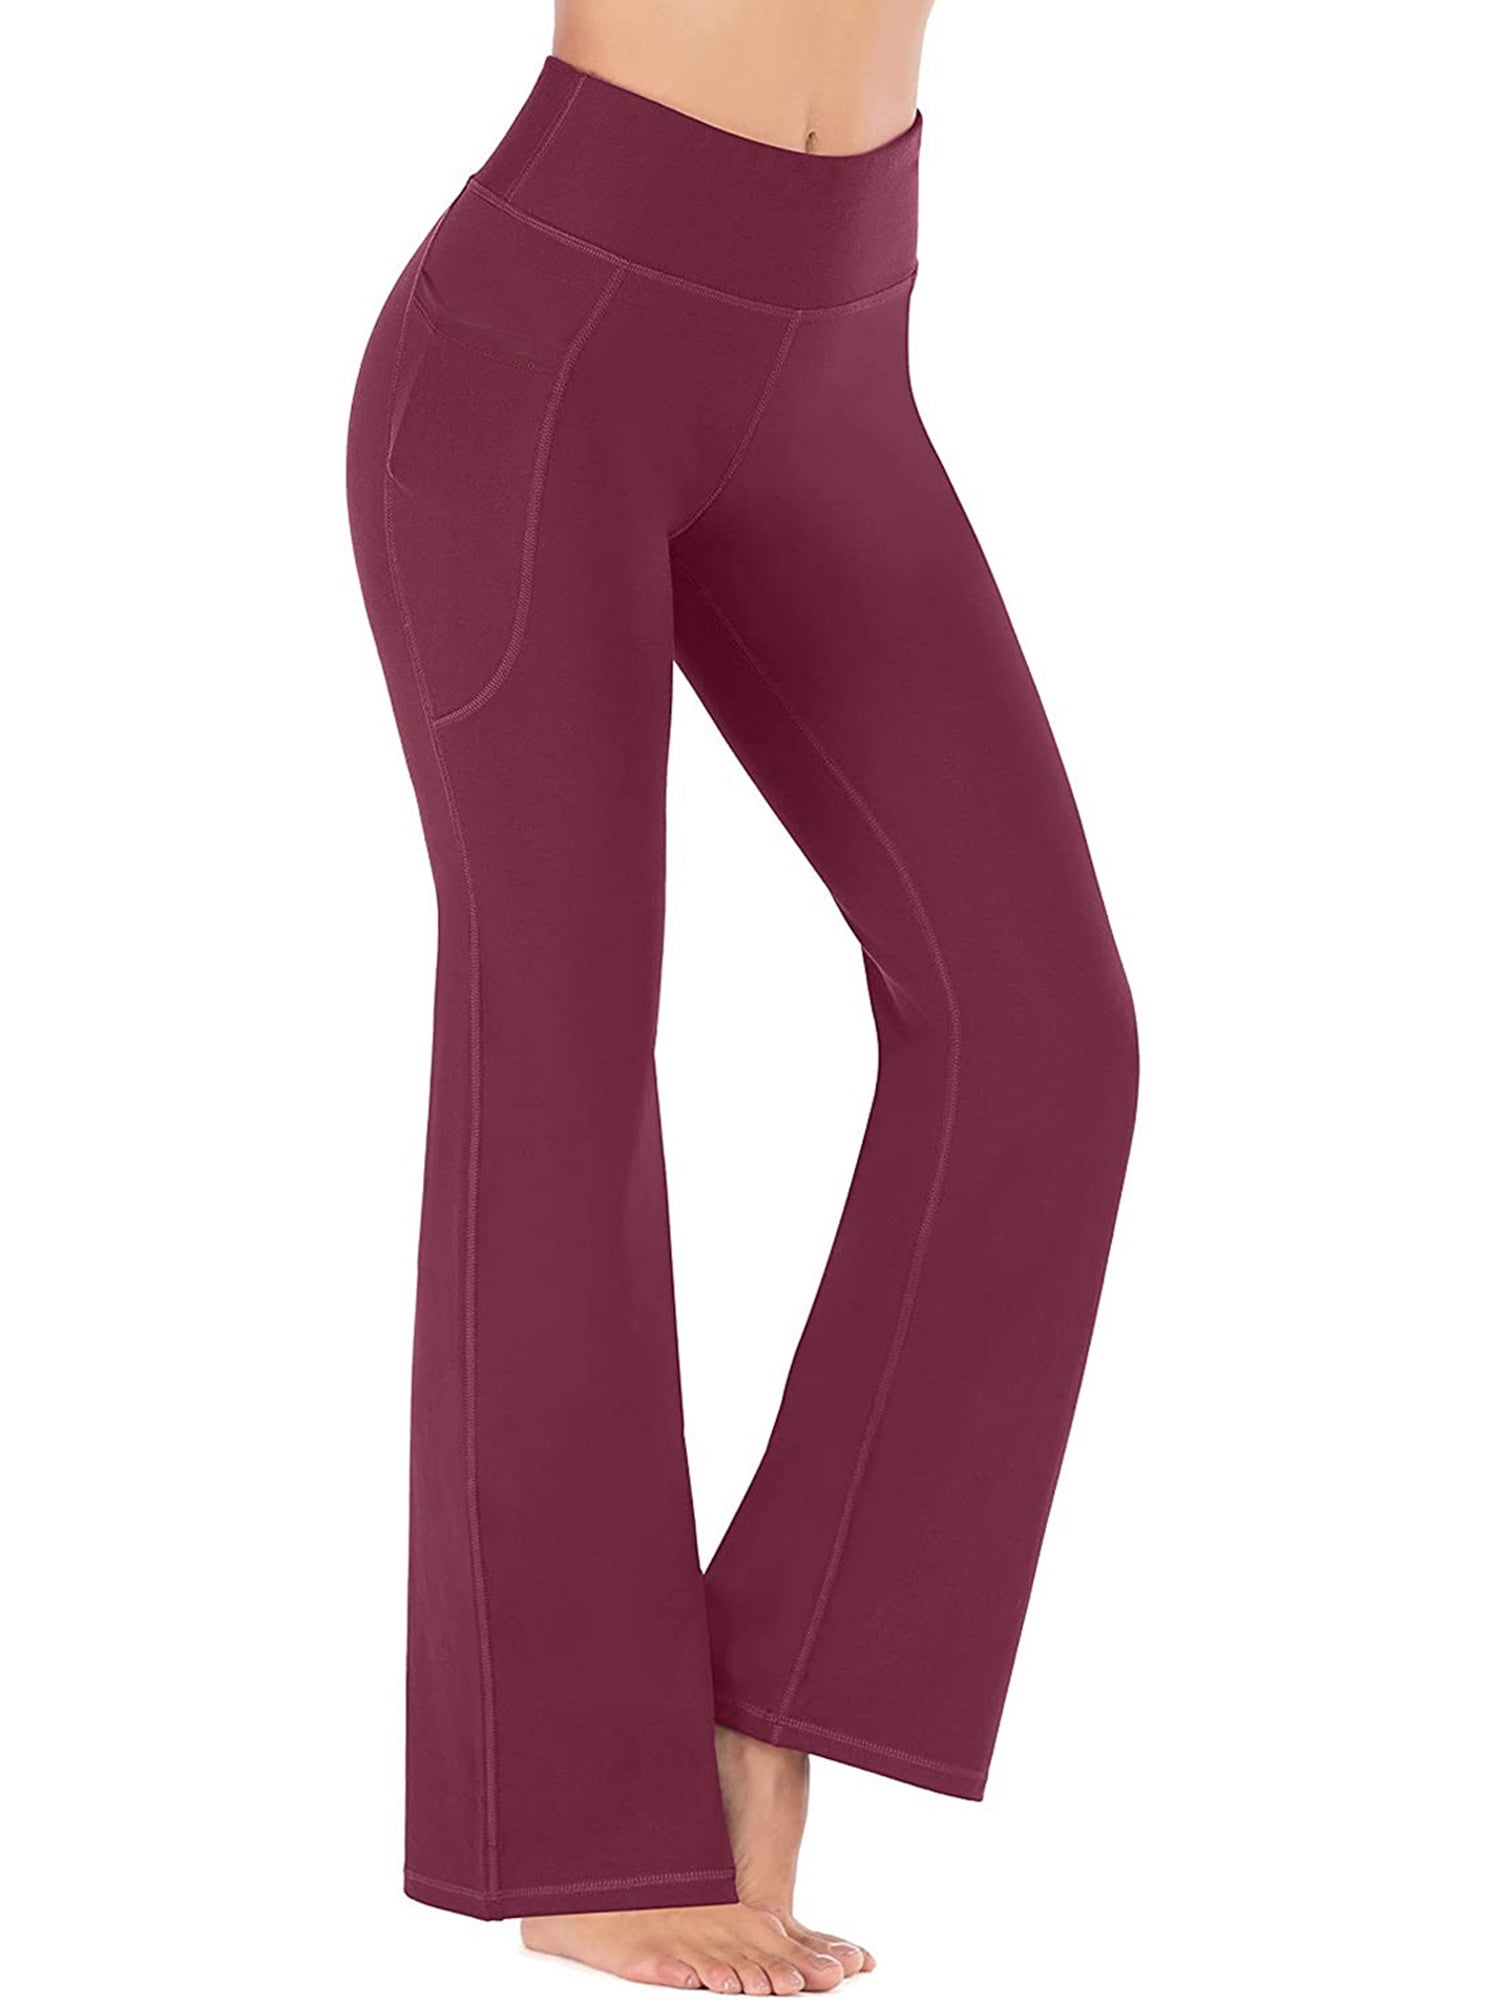 Details about   Women Bootcut Yoga Pants Bootleg Flared Trousers Casual Fitness Stretch Sports U 